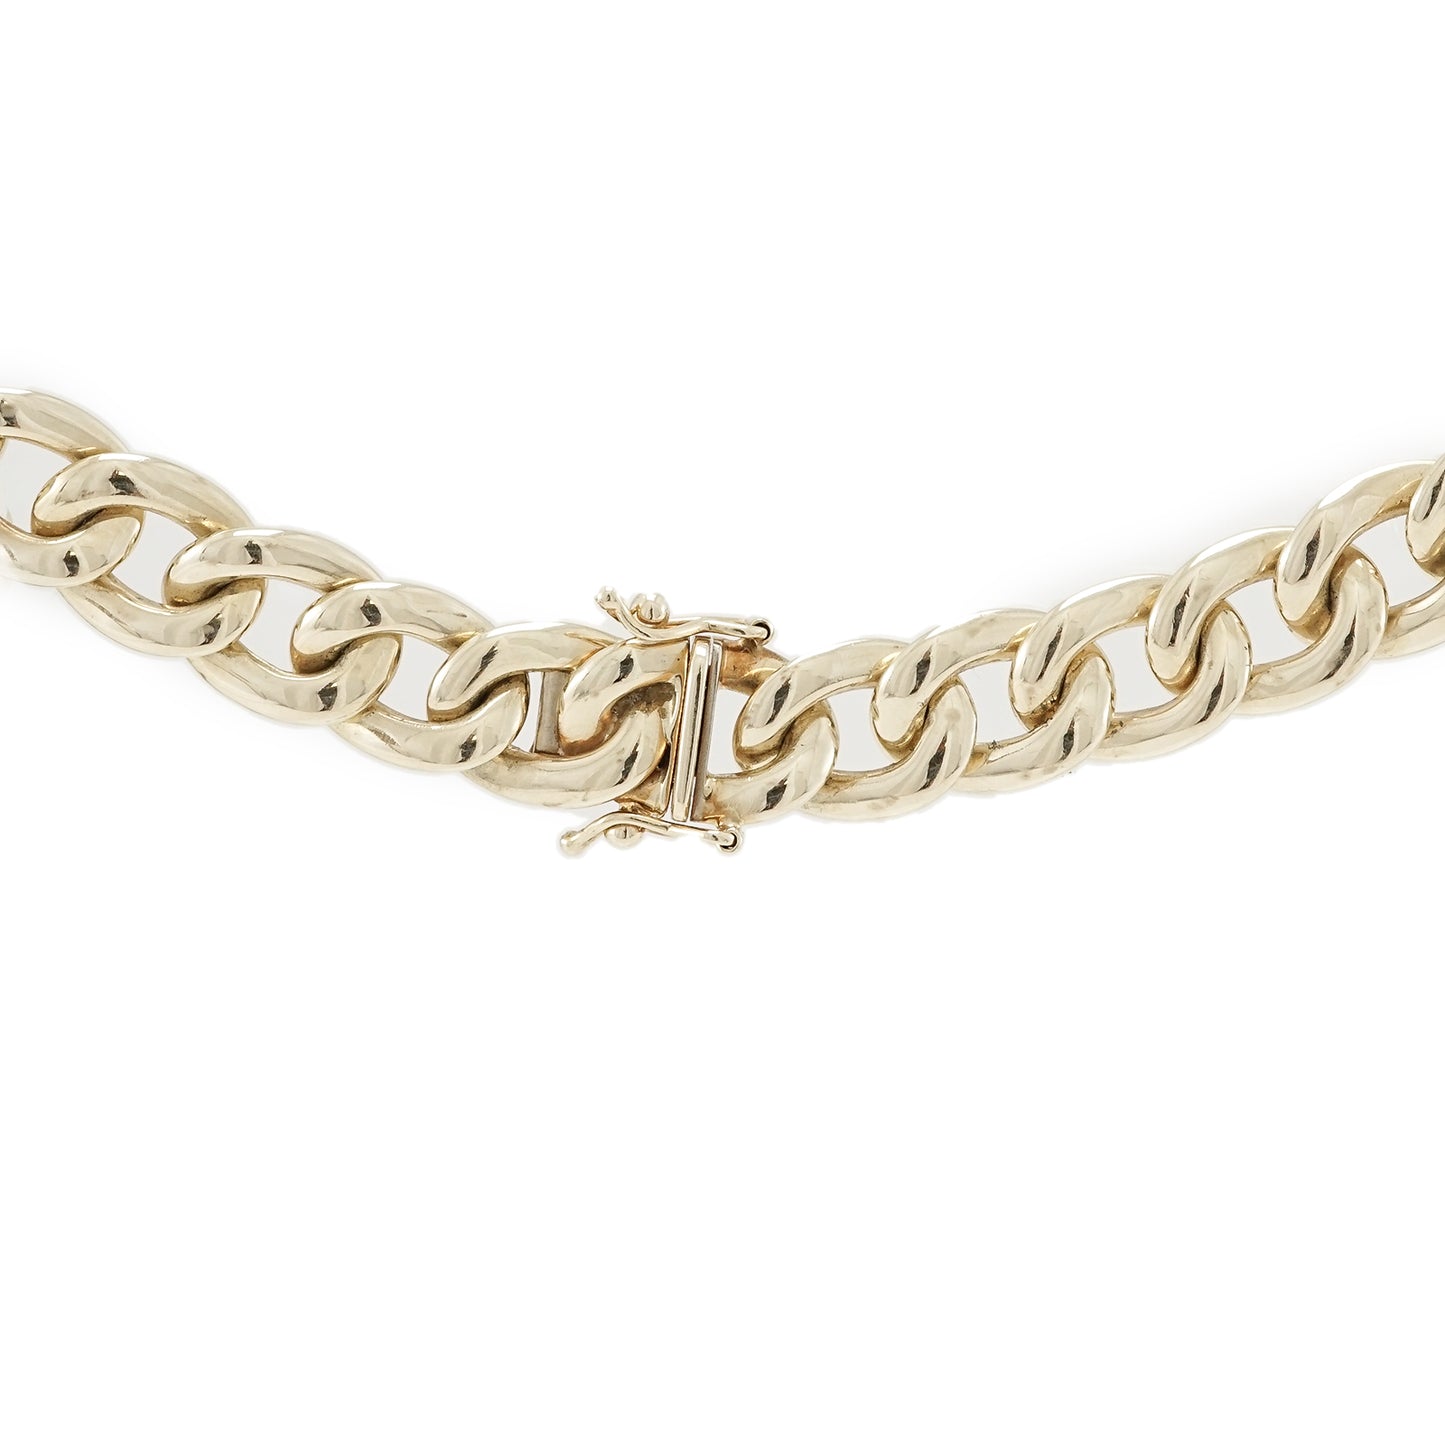 Solid 14K 585 gold chain necklace curb chain with 38 diamonds 0.61 carat 42cm